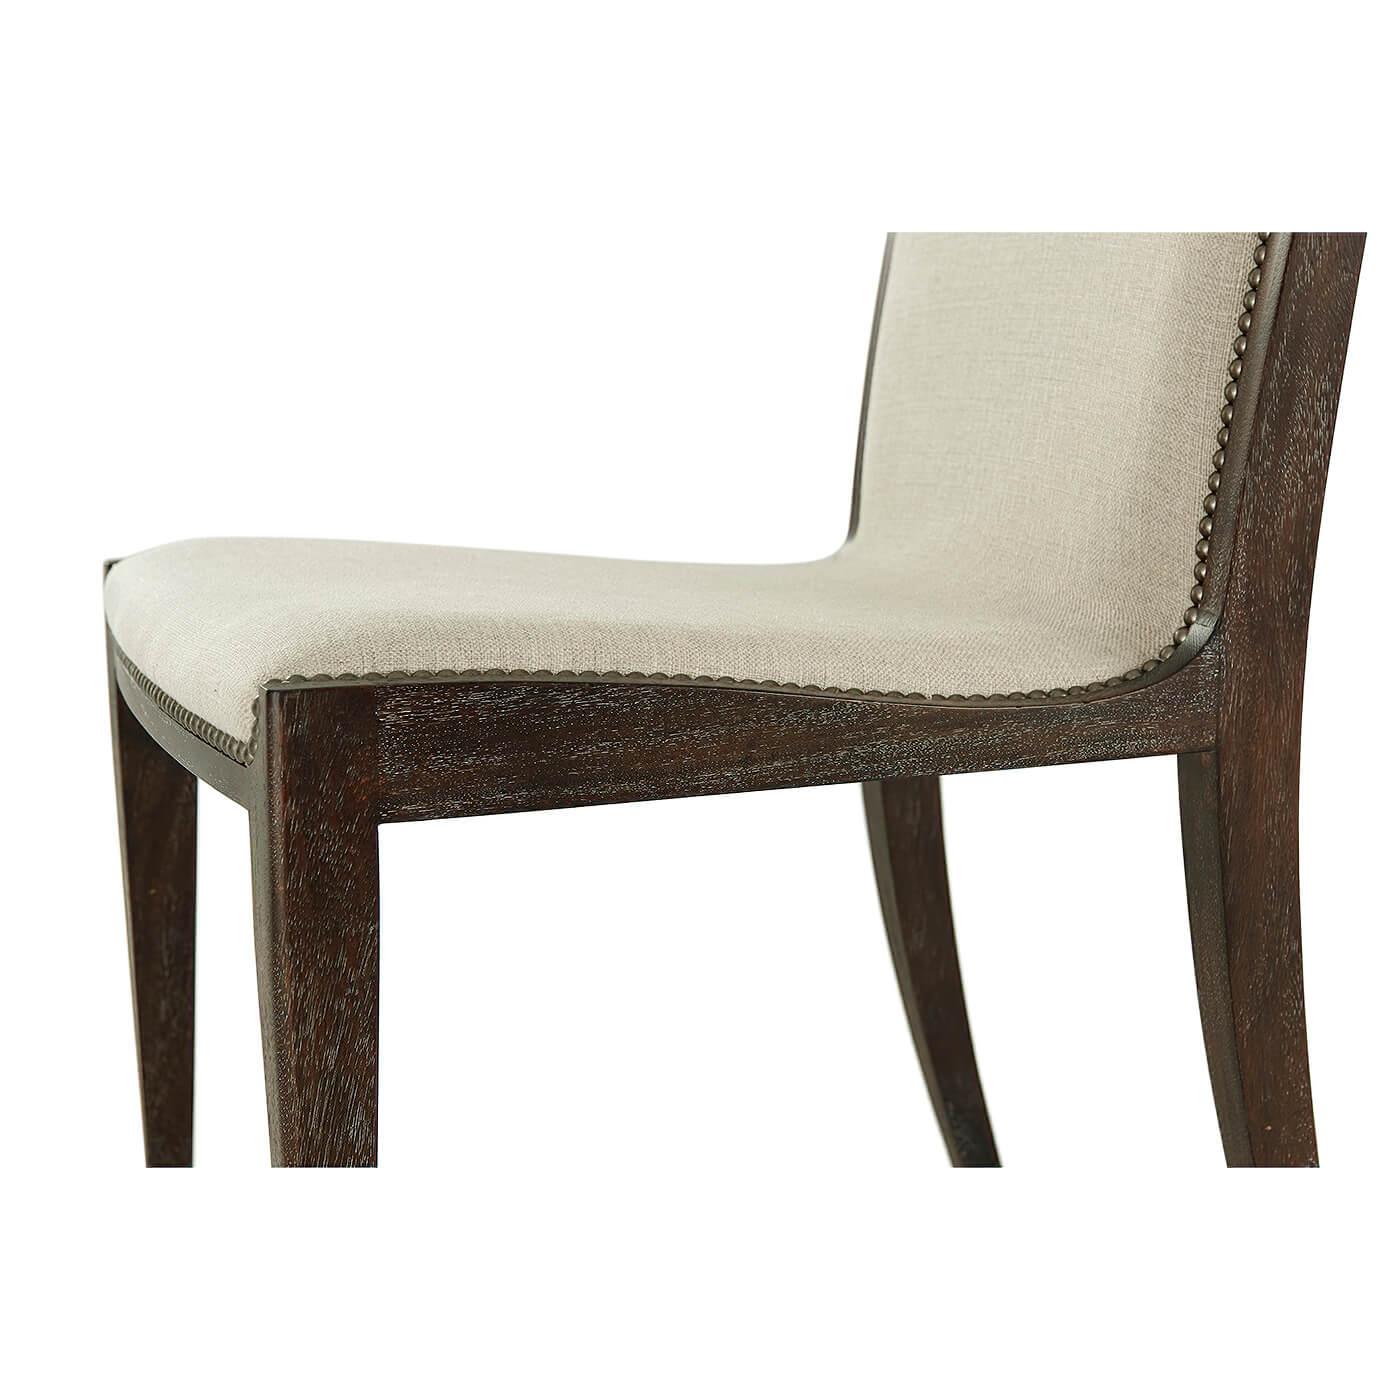 Contemporary Mid-Century Modern Dining Chair For Sale